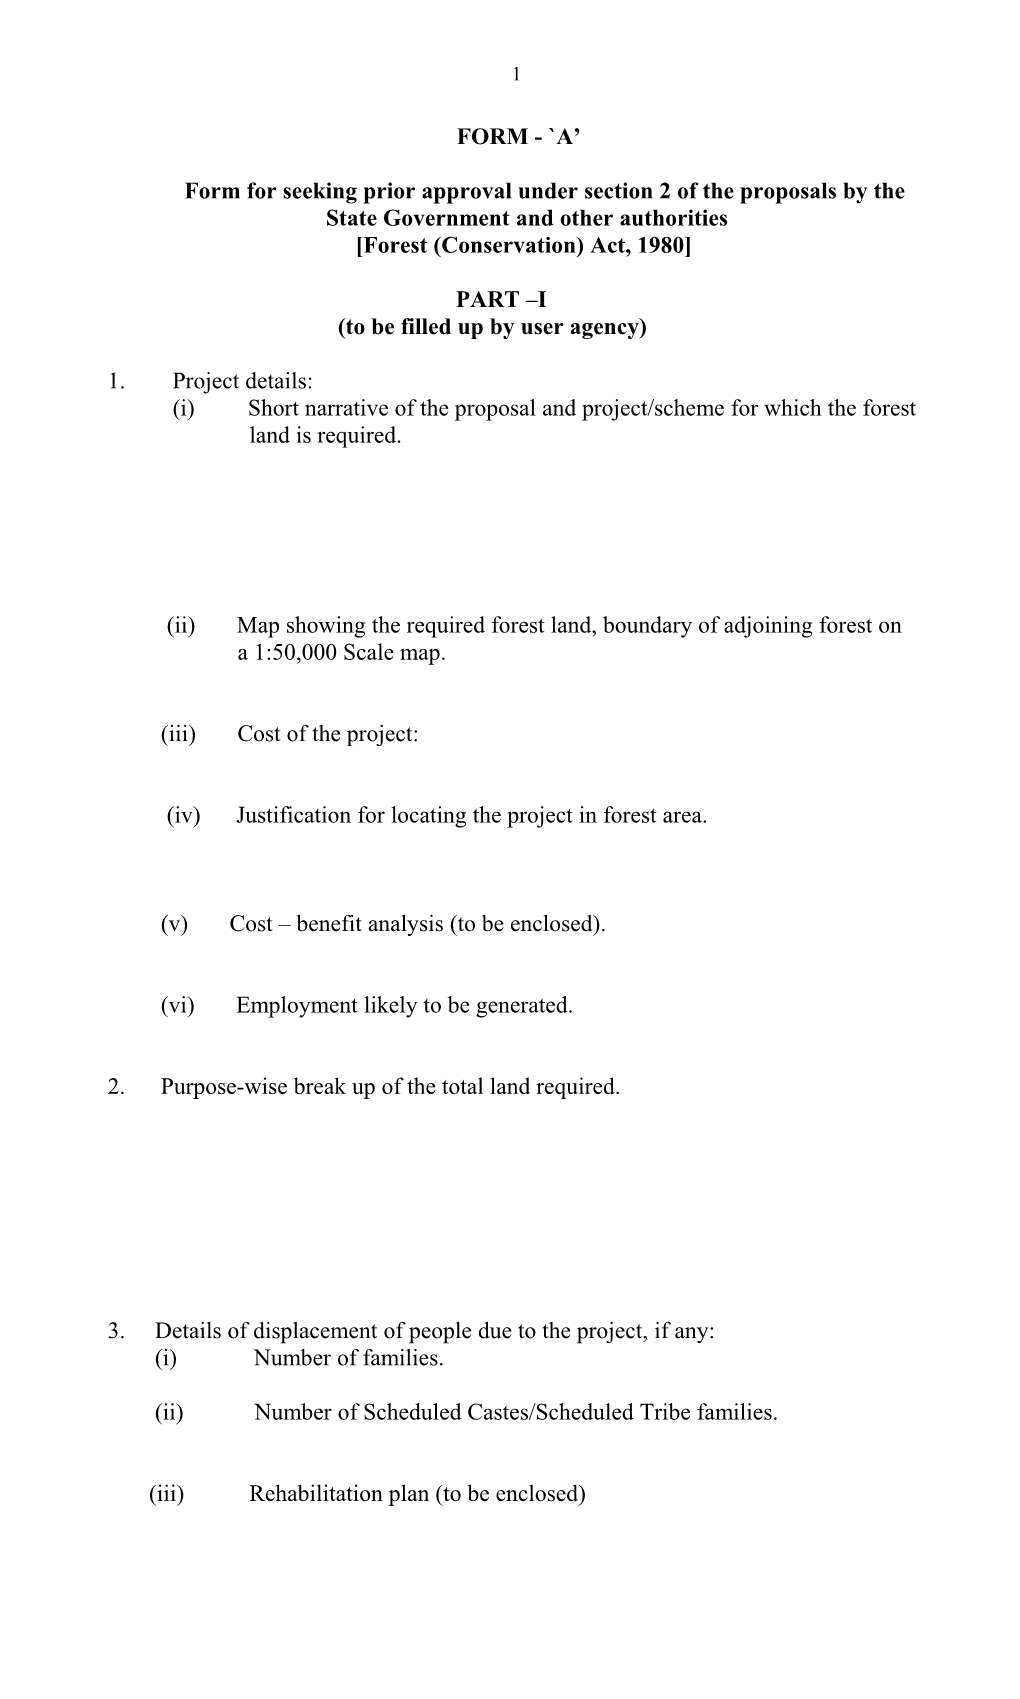 Form for Seeking Prior Approval Under Section 2 of the Proposals by The